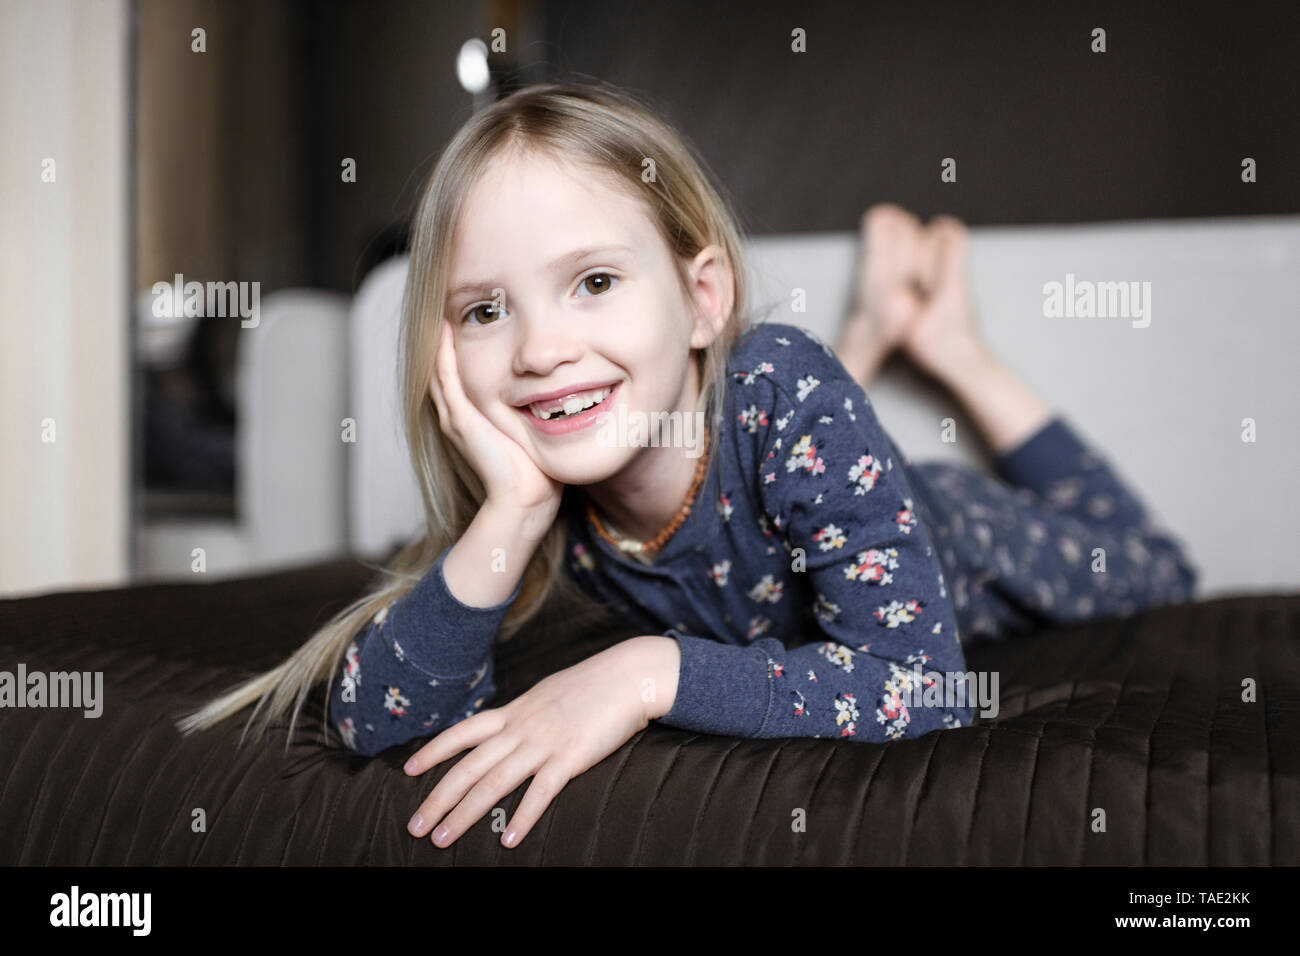 Portrait of smiling little girl with tooth gap relaxing on couch at home Stock Photo